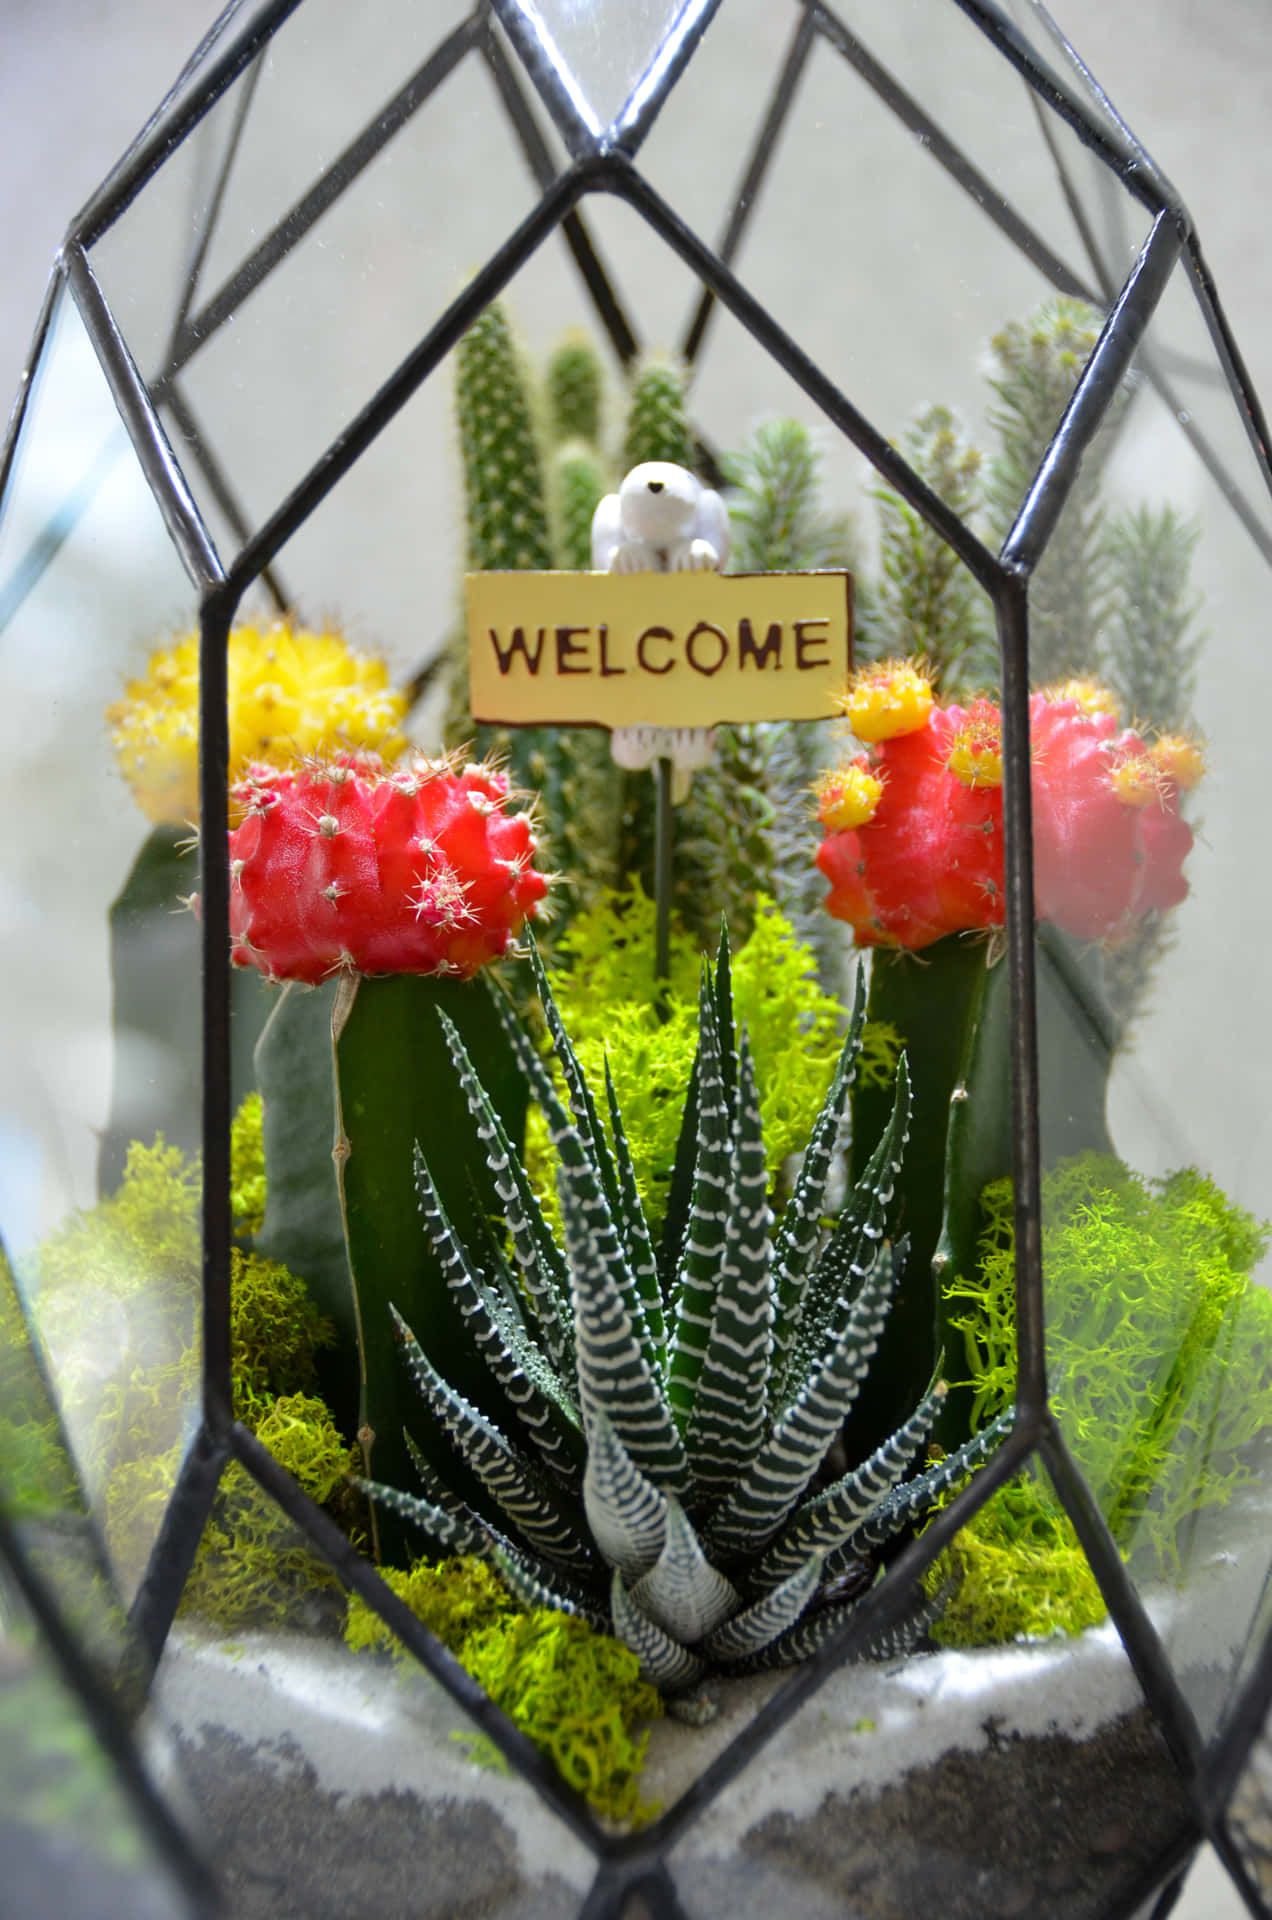 Uncover nature's beauty with a homemade Terrarium.